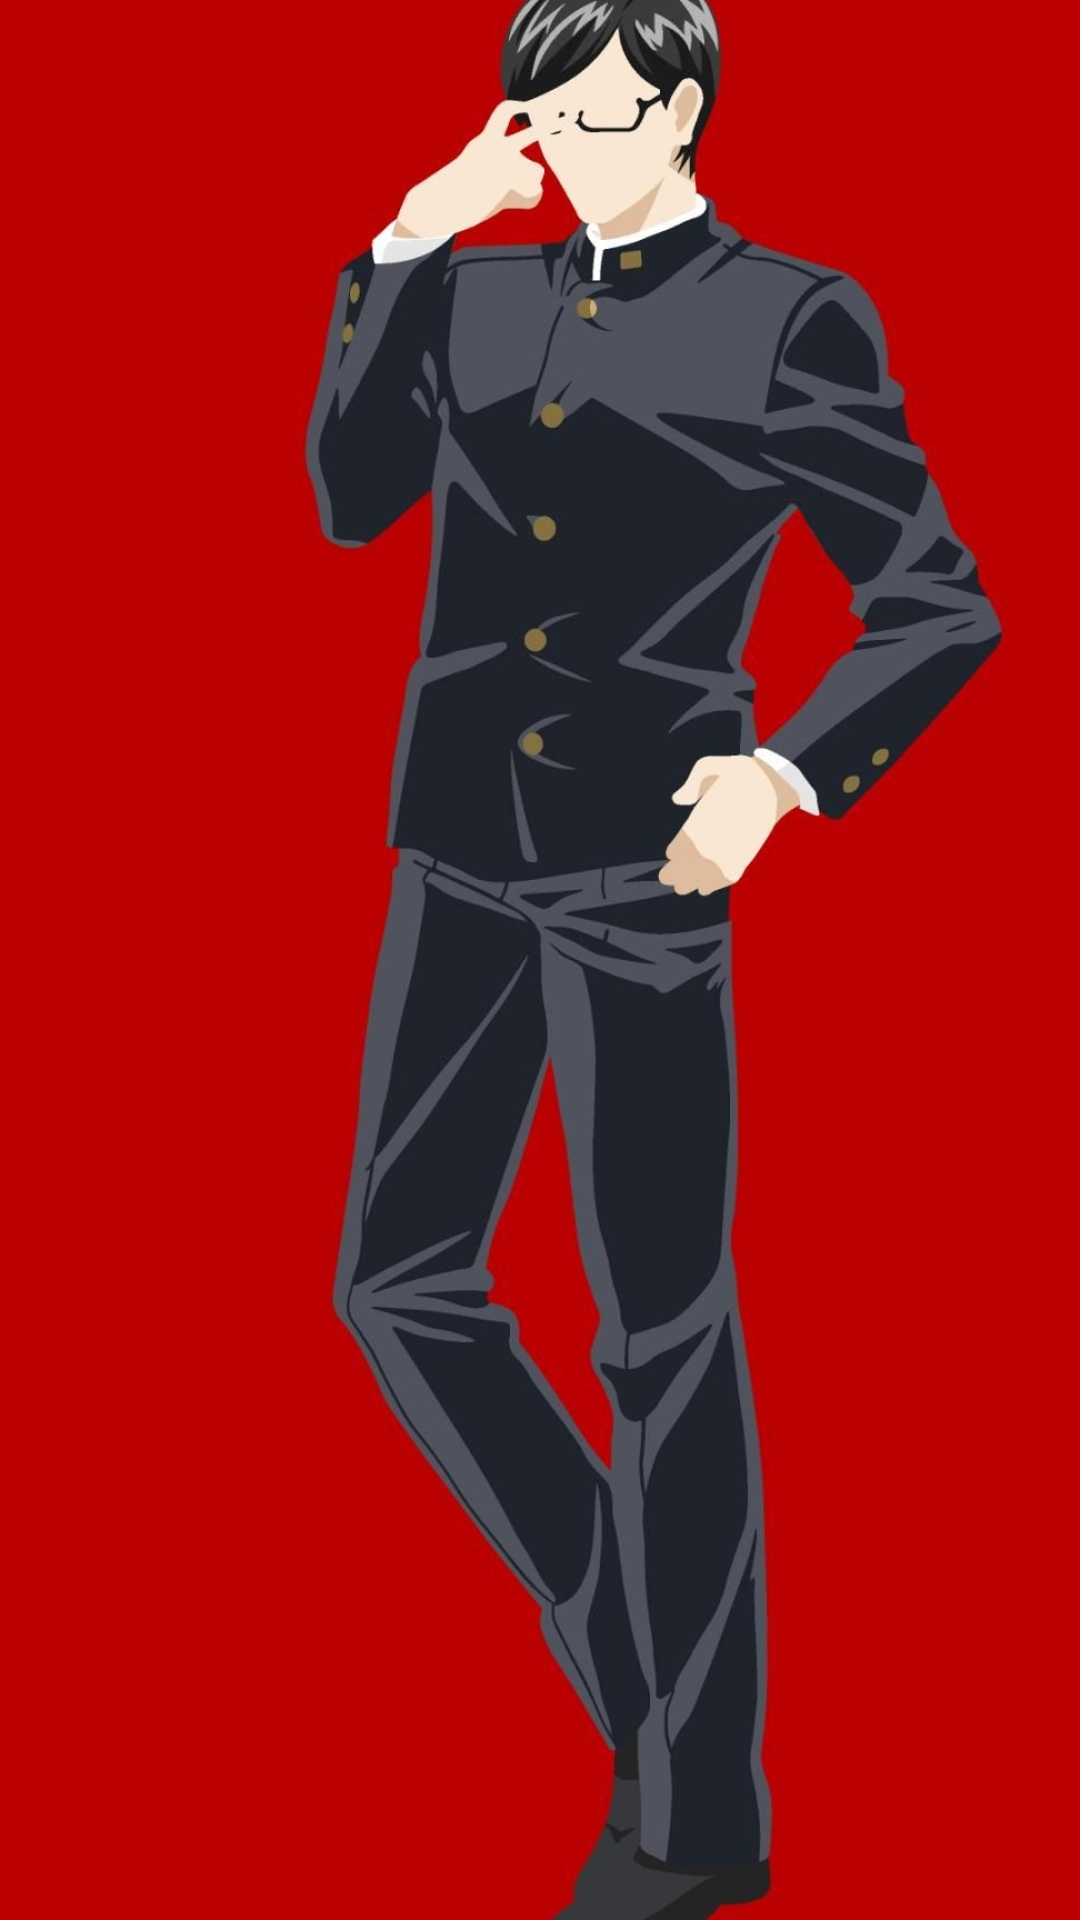 Sakamoto wallpapers, Top free backgrounds, Anime series, Cool protagonist, 1080x1920 Full HD Phone